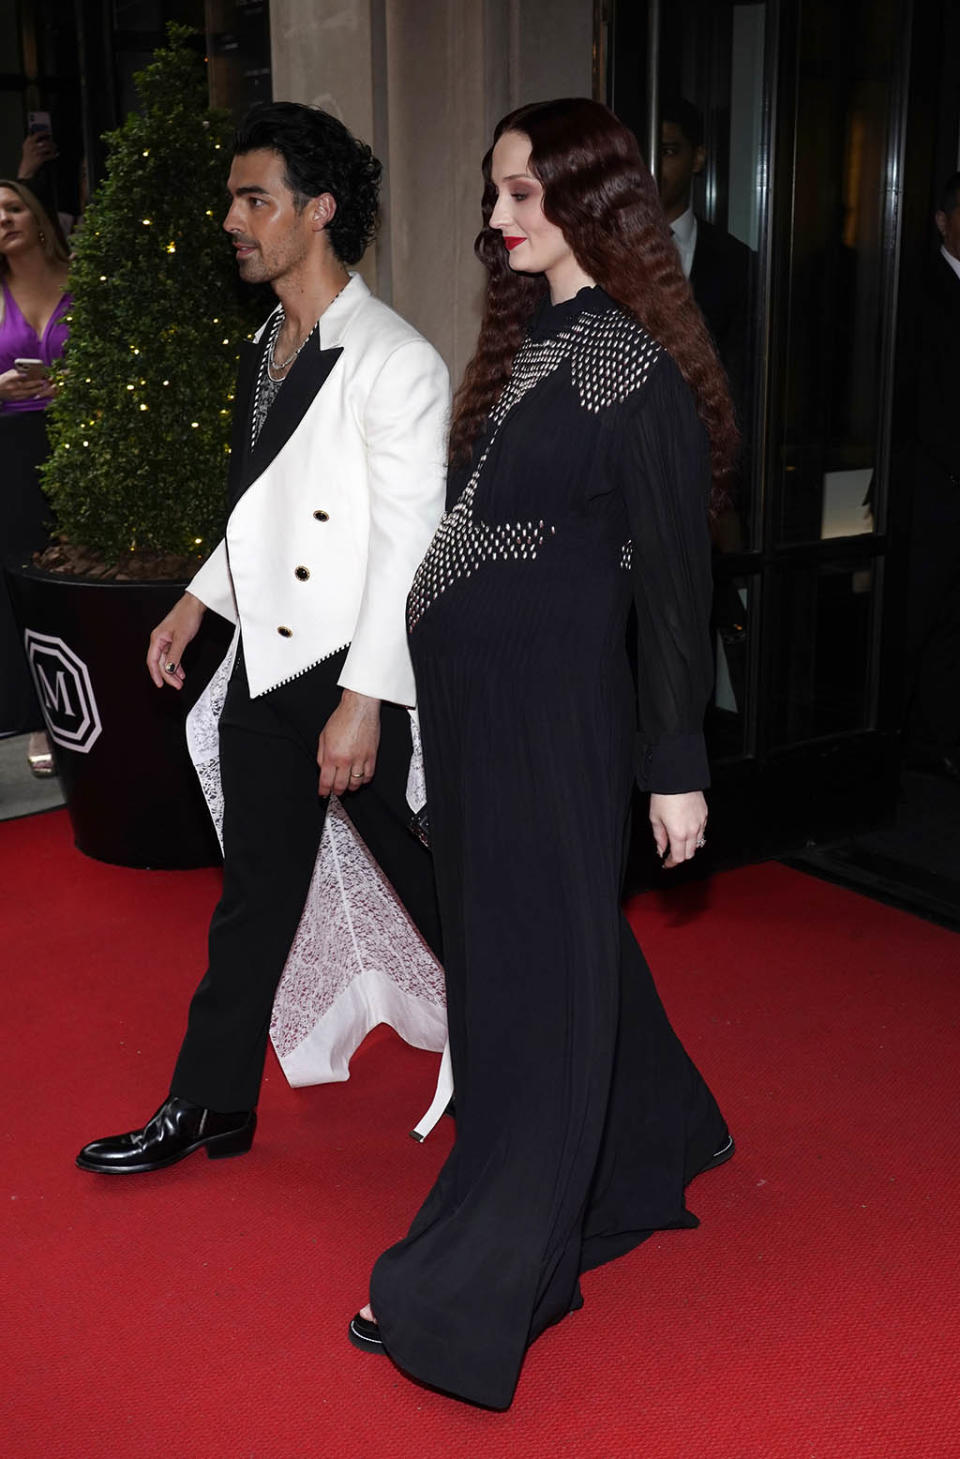 Joe Jonas and Sophie Turner depart The Mark Hotel prior to attending The Metropolitan Museum of Art’s Costume Institute benefit gala celebrating the opening of “In America: An Anthology of Fashion” on May 2, 2022, in New York. - Credit: Charles Sykes/Invision/AP